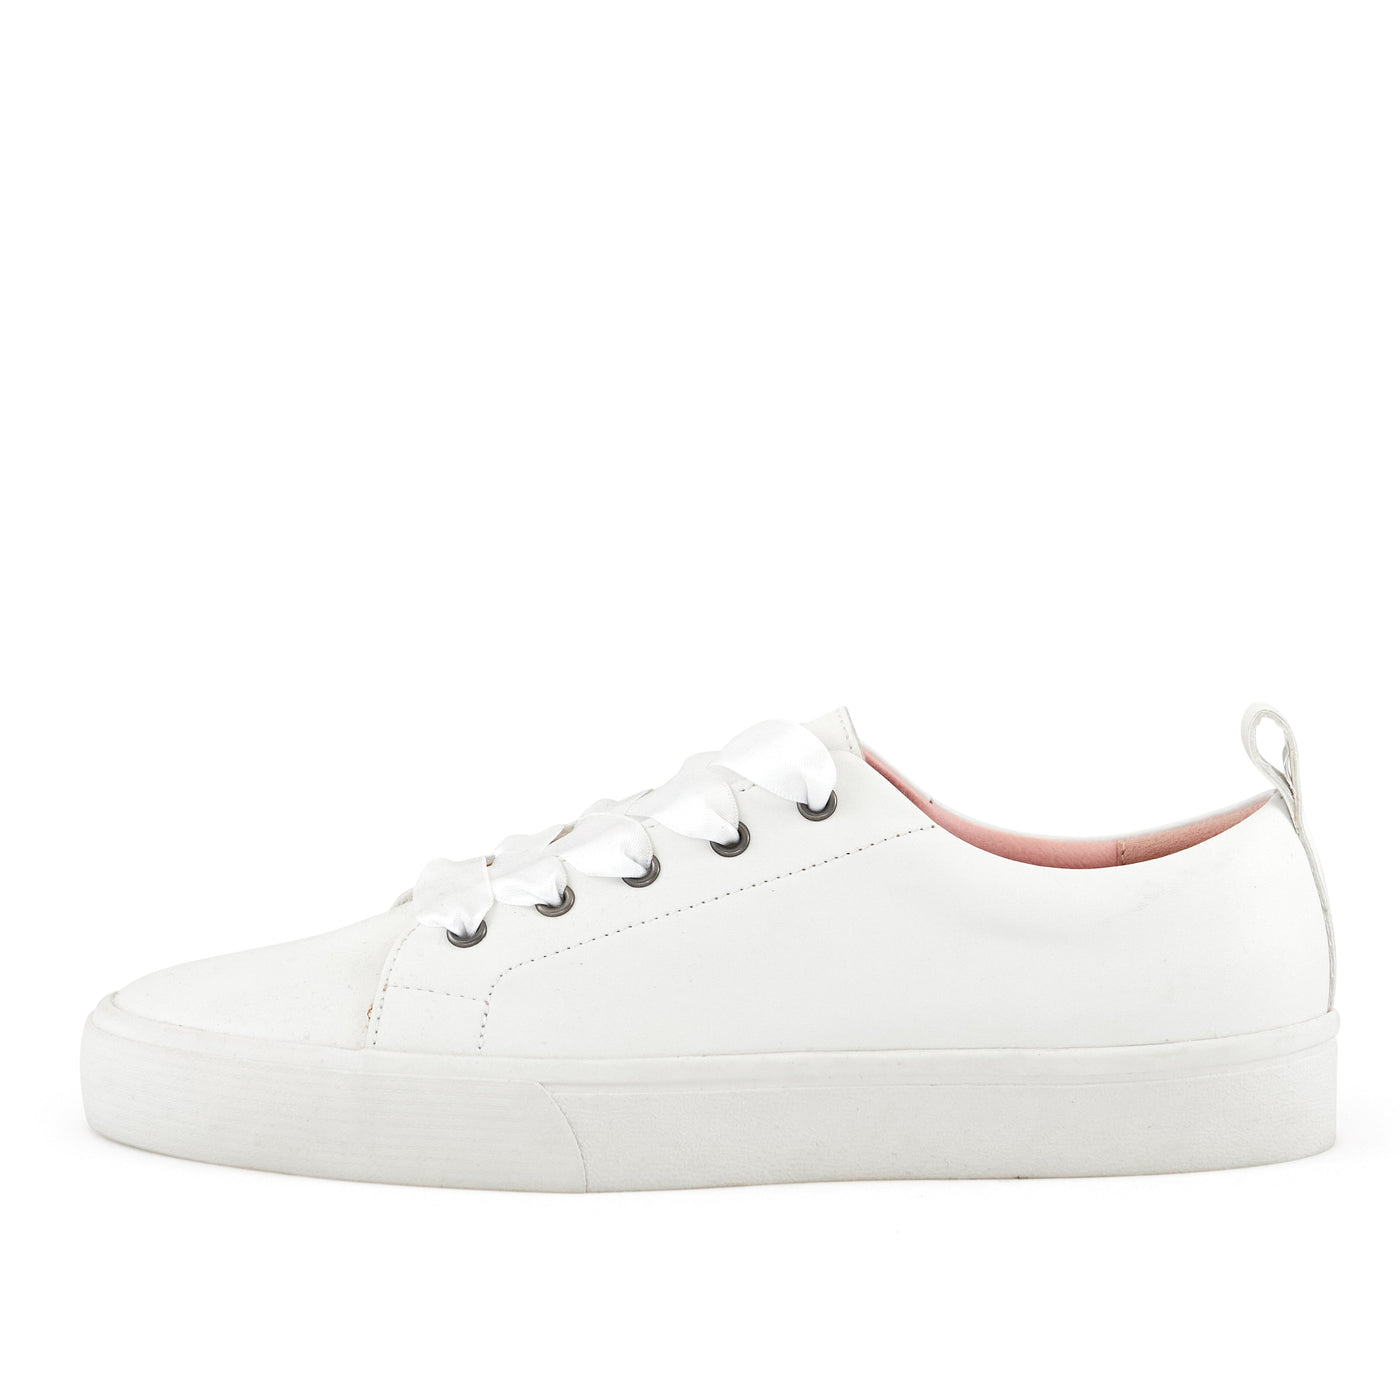 Women's Vancouver Wide Lace Sneaker White by Nest Shoes